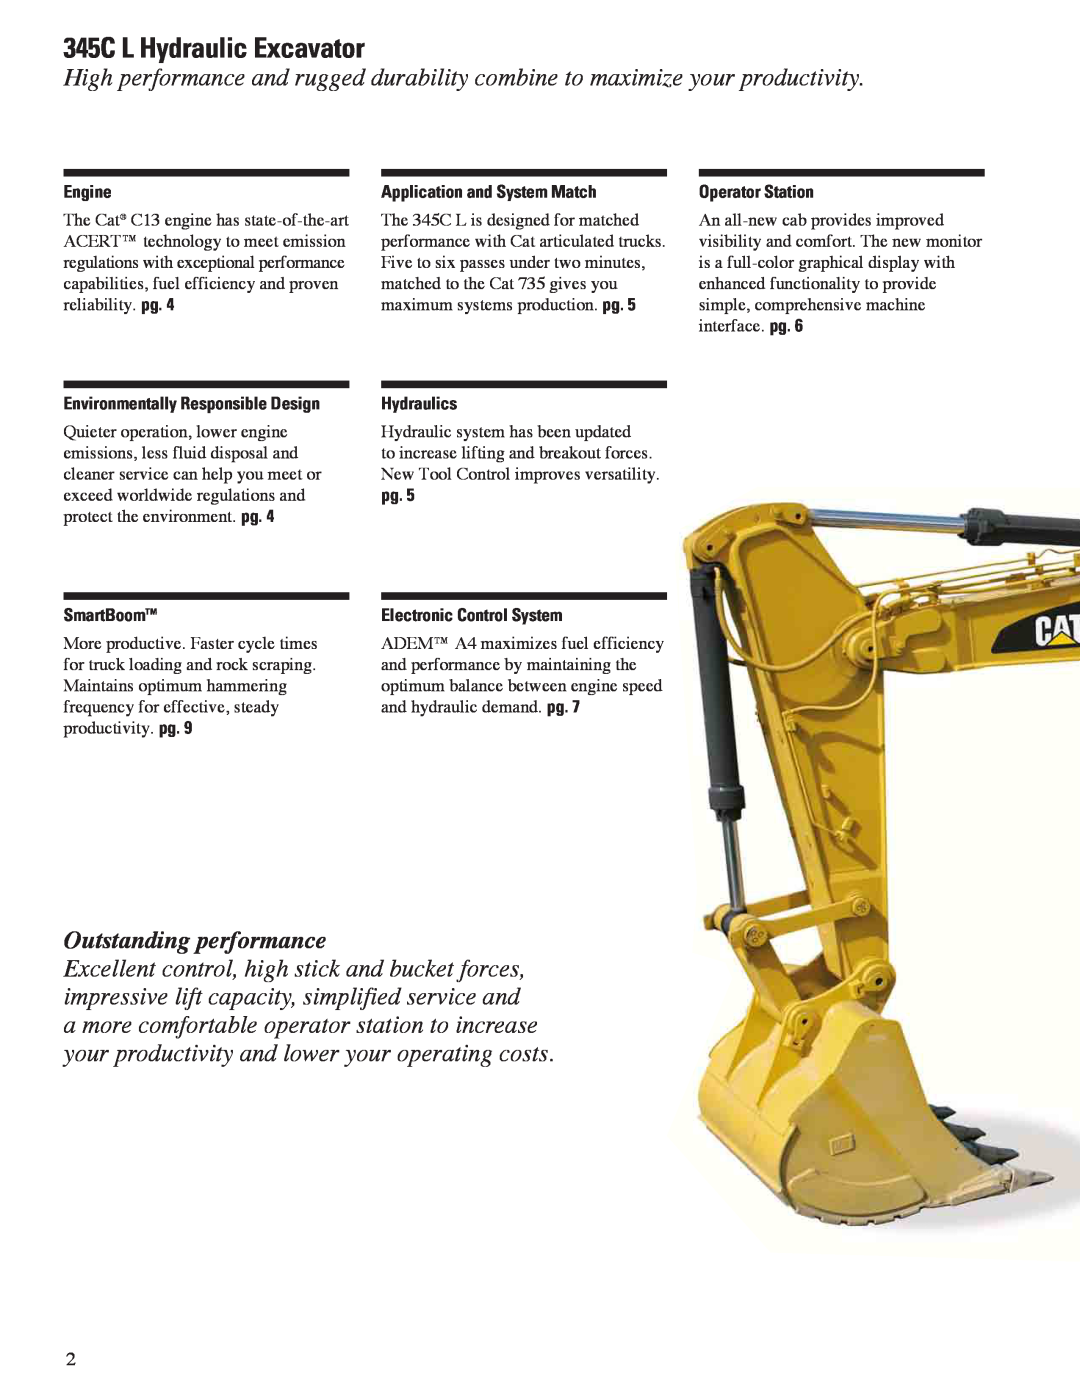 CAT manual 345C L Hydraulic Excavator, Outstanding performance 